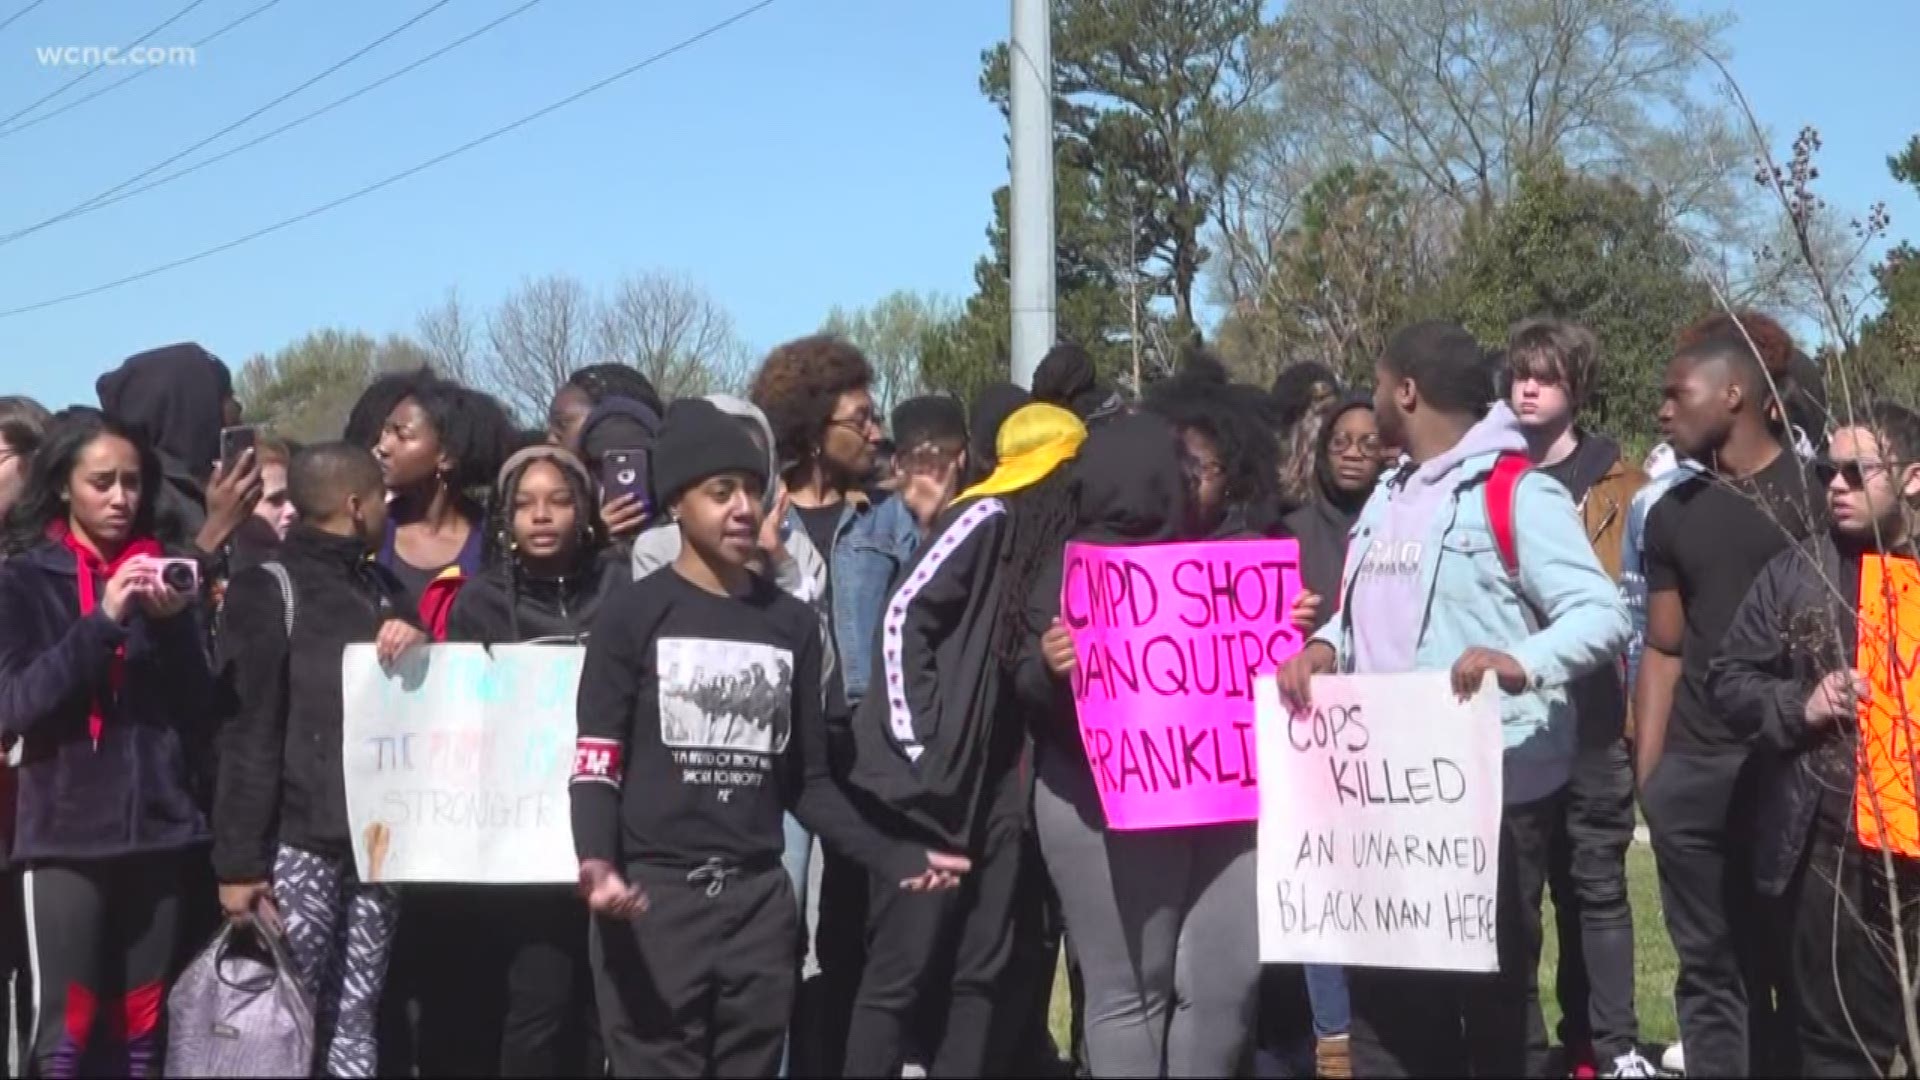 About 100 students from Northwest School of the Arts walked out of class just days after a CMPD police officer shot and killed Danquoiors Franklin in the parking lot of the Burger King just up the street from the school.